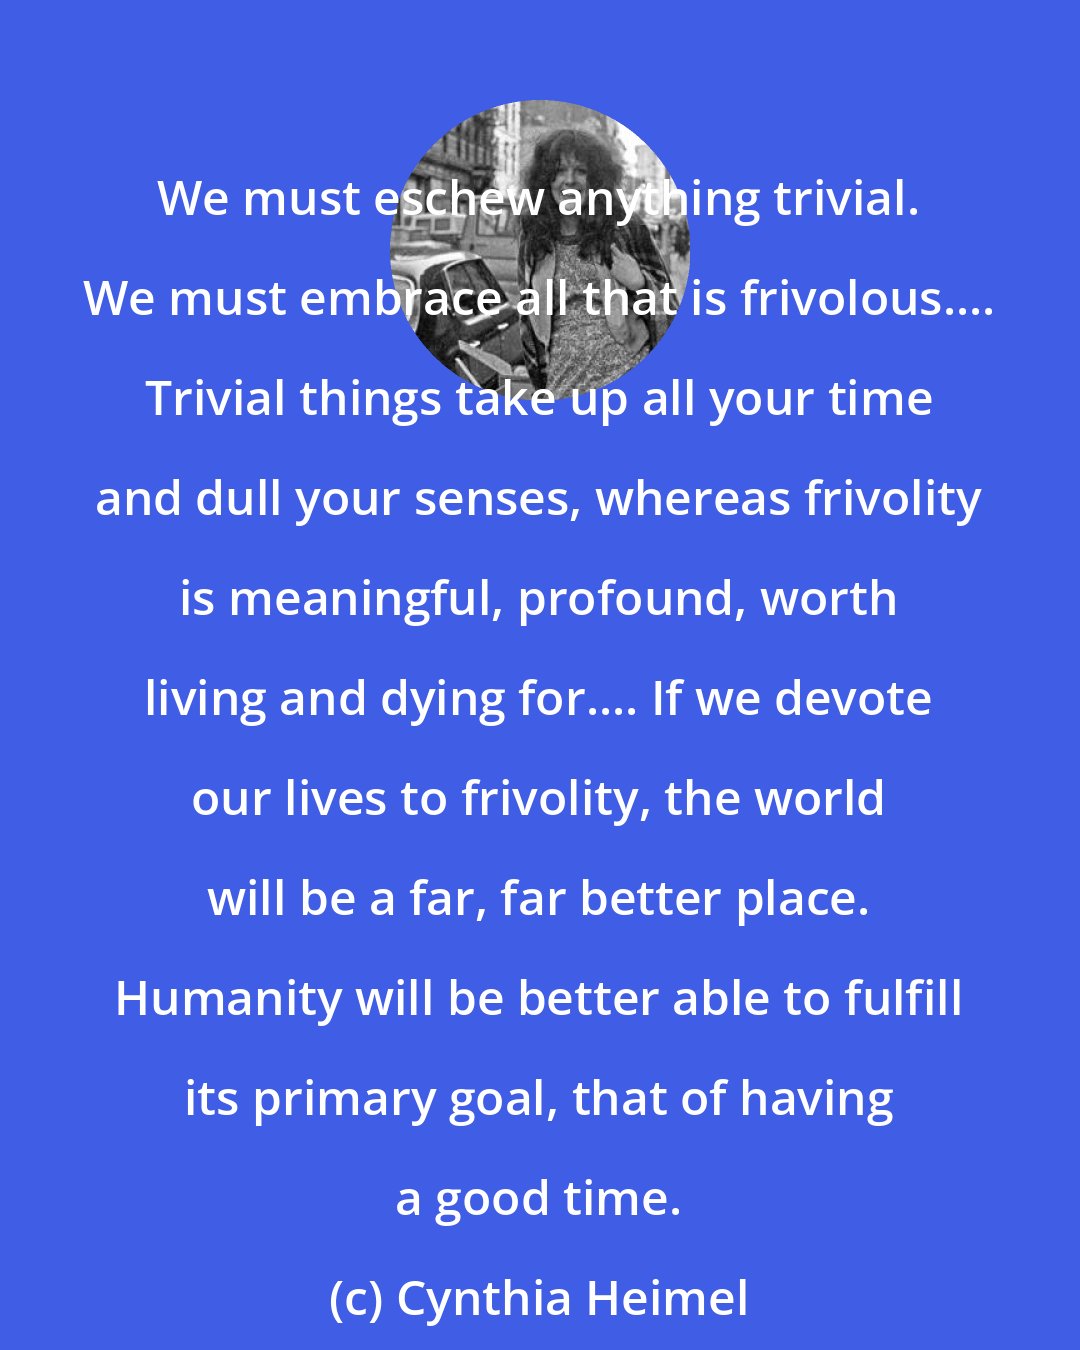 Cynthia Heimel: We must eschew anything trivial. We must embrace all that is frivolous.... Trivial things take up all your time and dull your senses, whereas frivolity is meaningful, profound, worth living and dying for.... If we devote our lives to frivolity, the world will be a far, far better place. Humanity will be better able to fulfill its primary goal, that of having a good time.